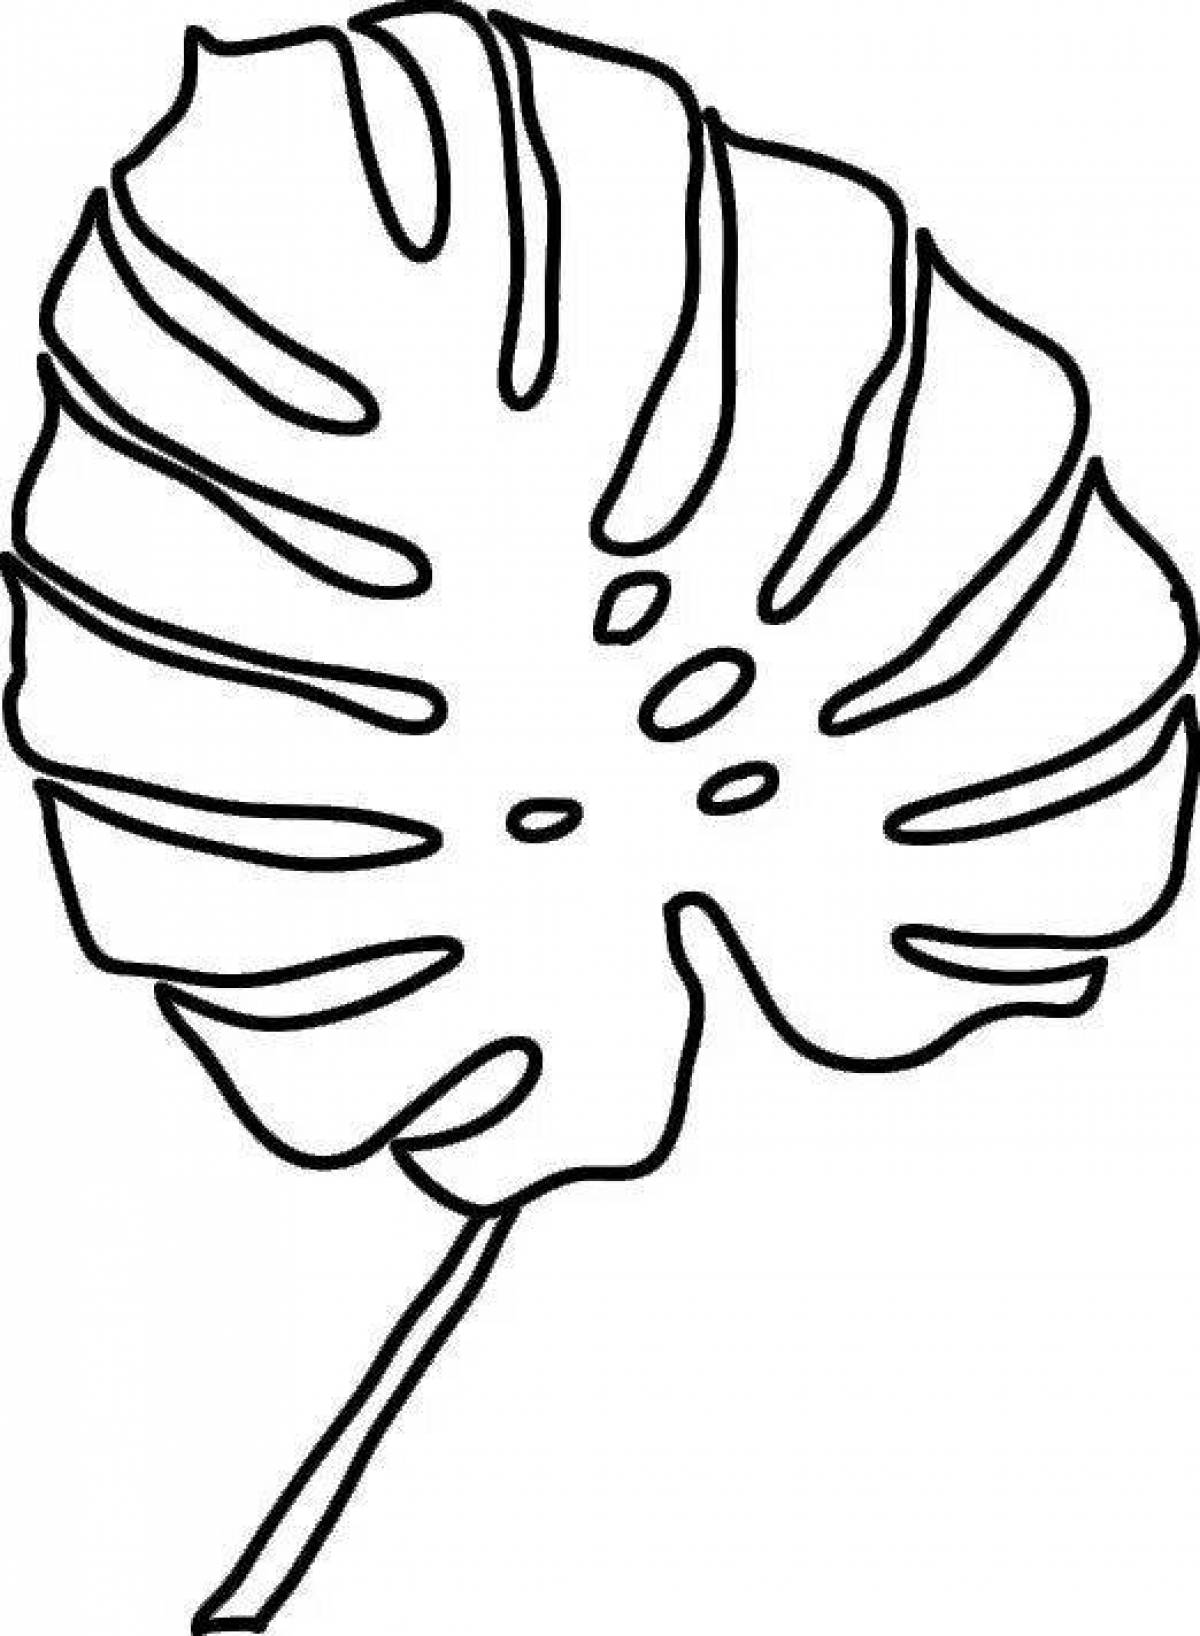 Fabulous monstera leaf coloring page